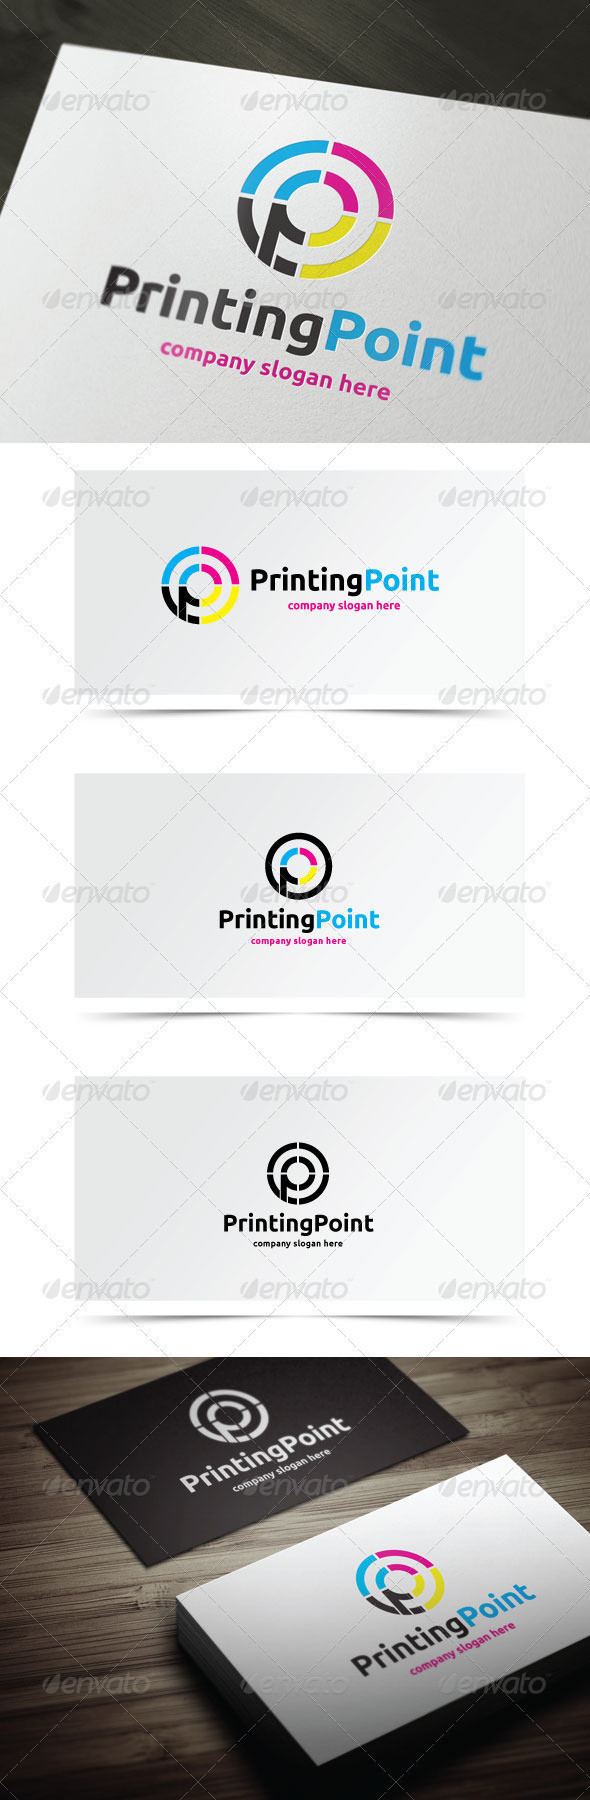 Printing point preview